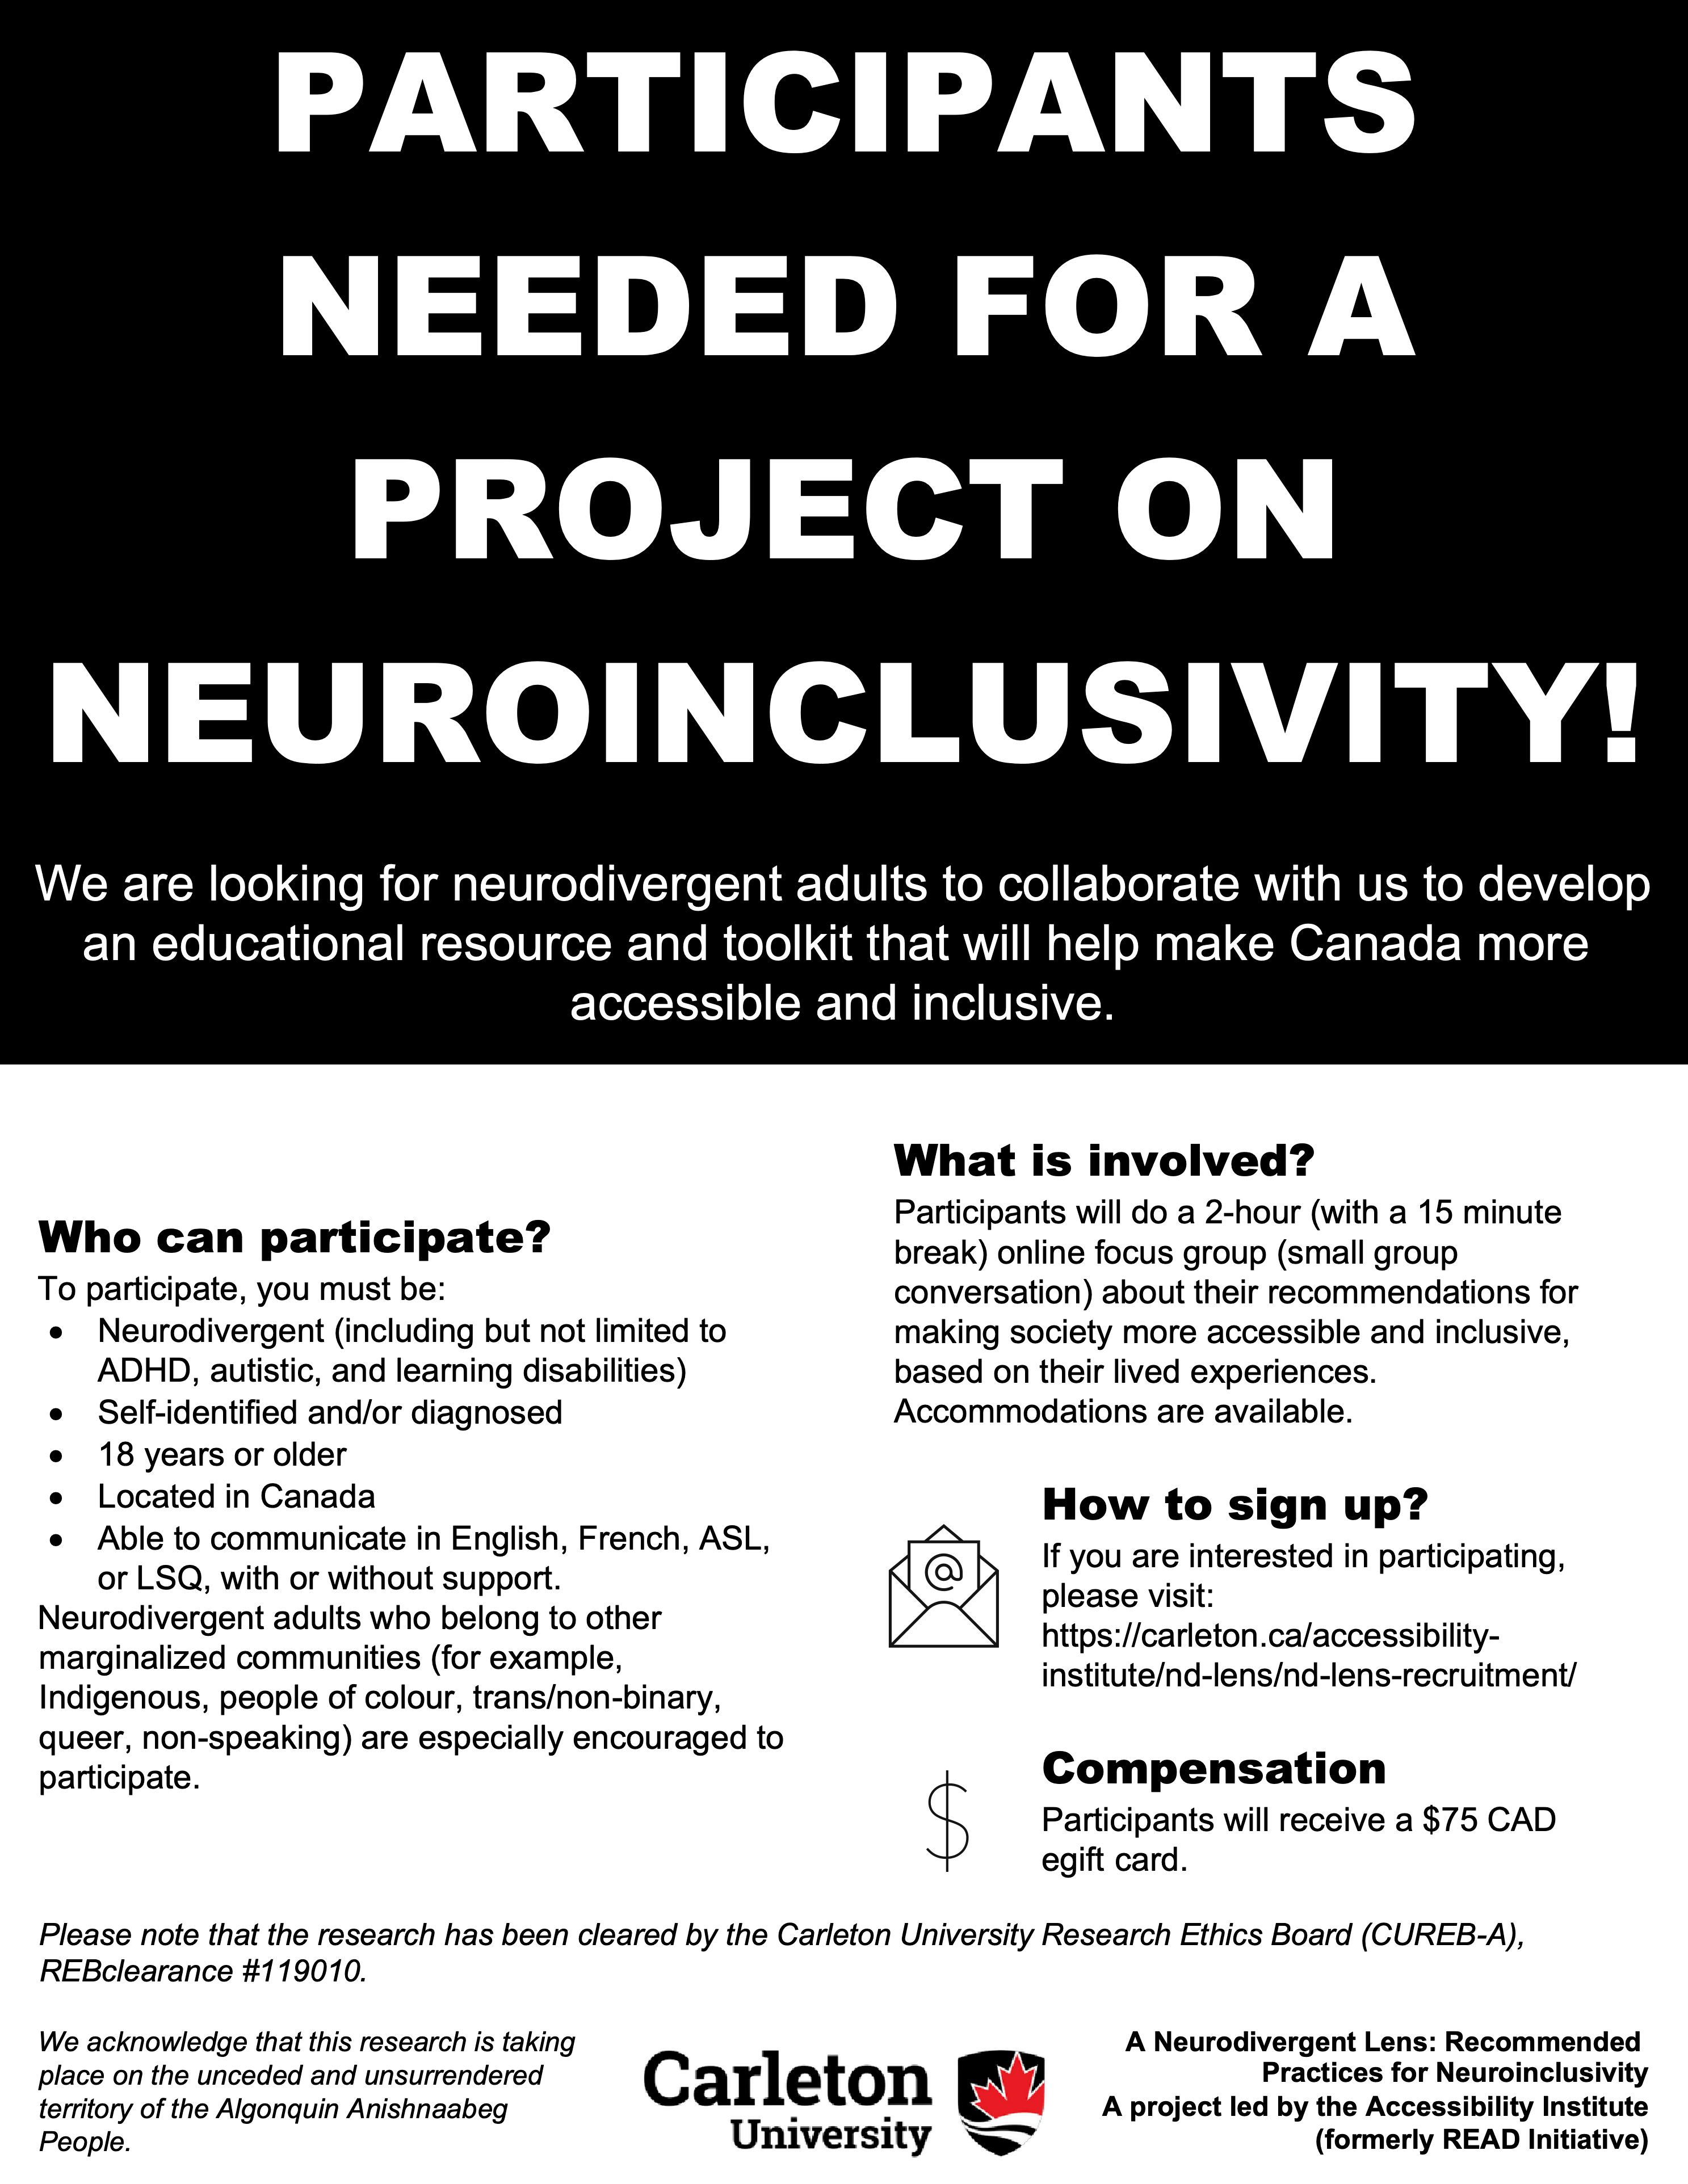 Paricipants needed for a project on neuroinclusivity poster